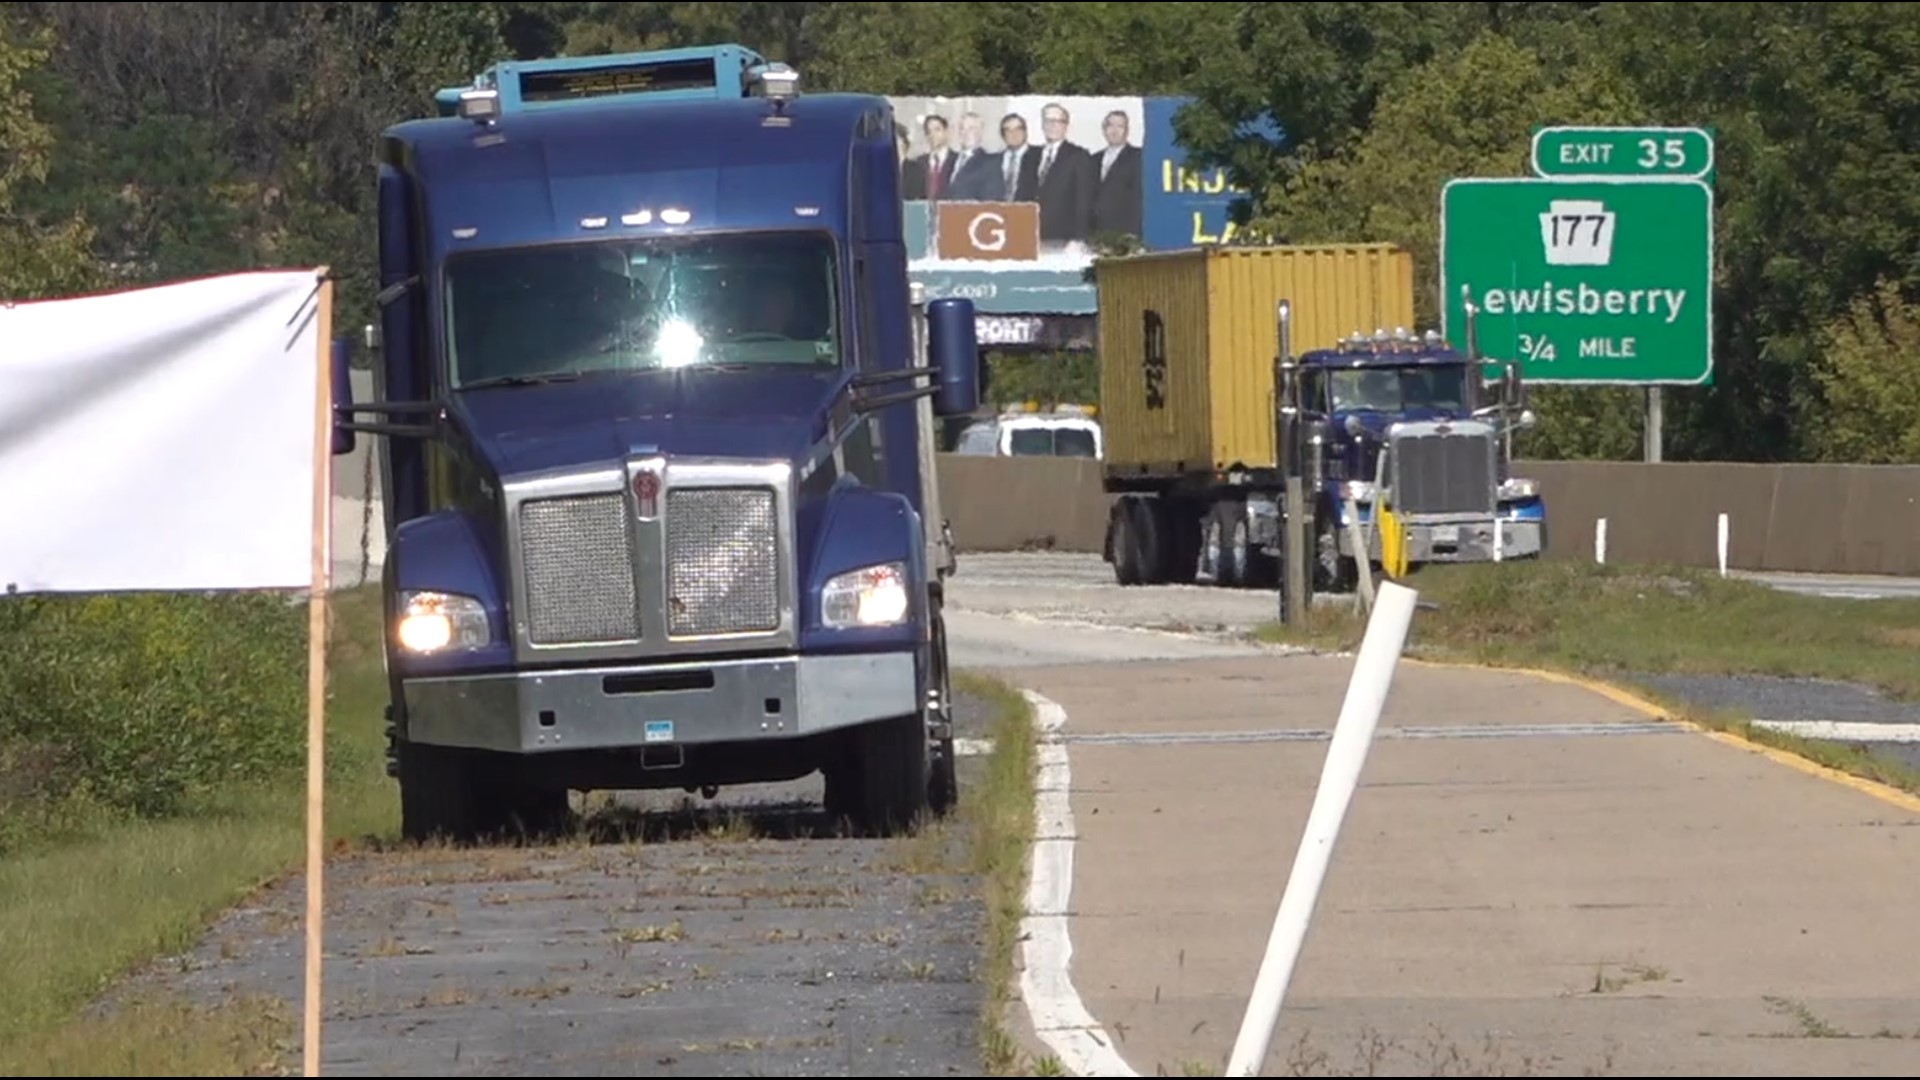 Organizers said professional truck driving was often a thankless and underappreciated job.